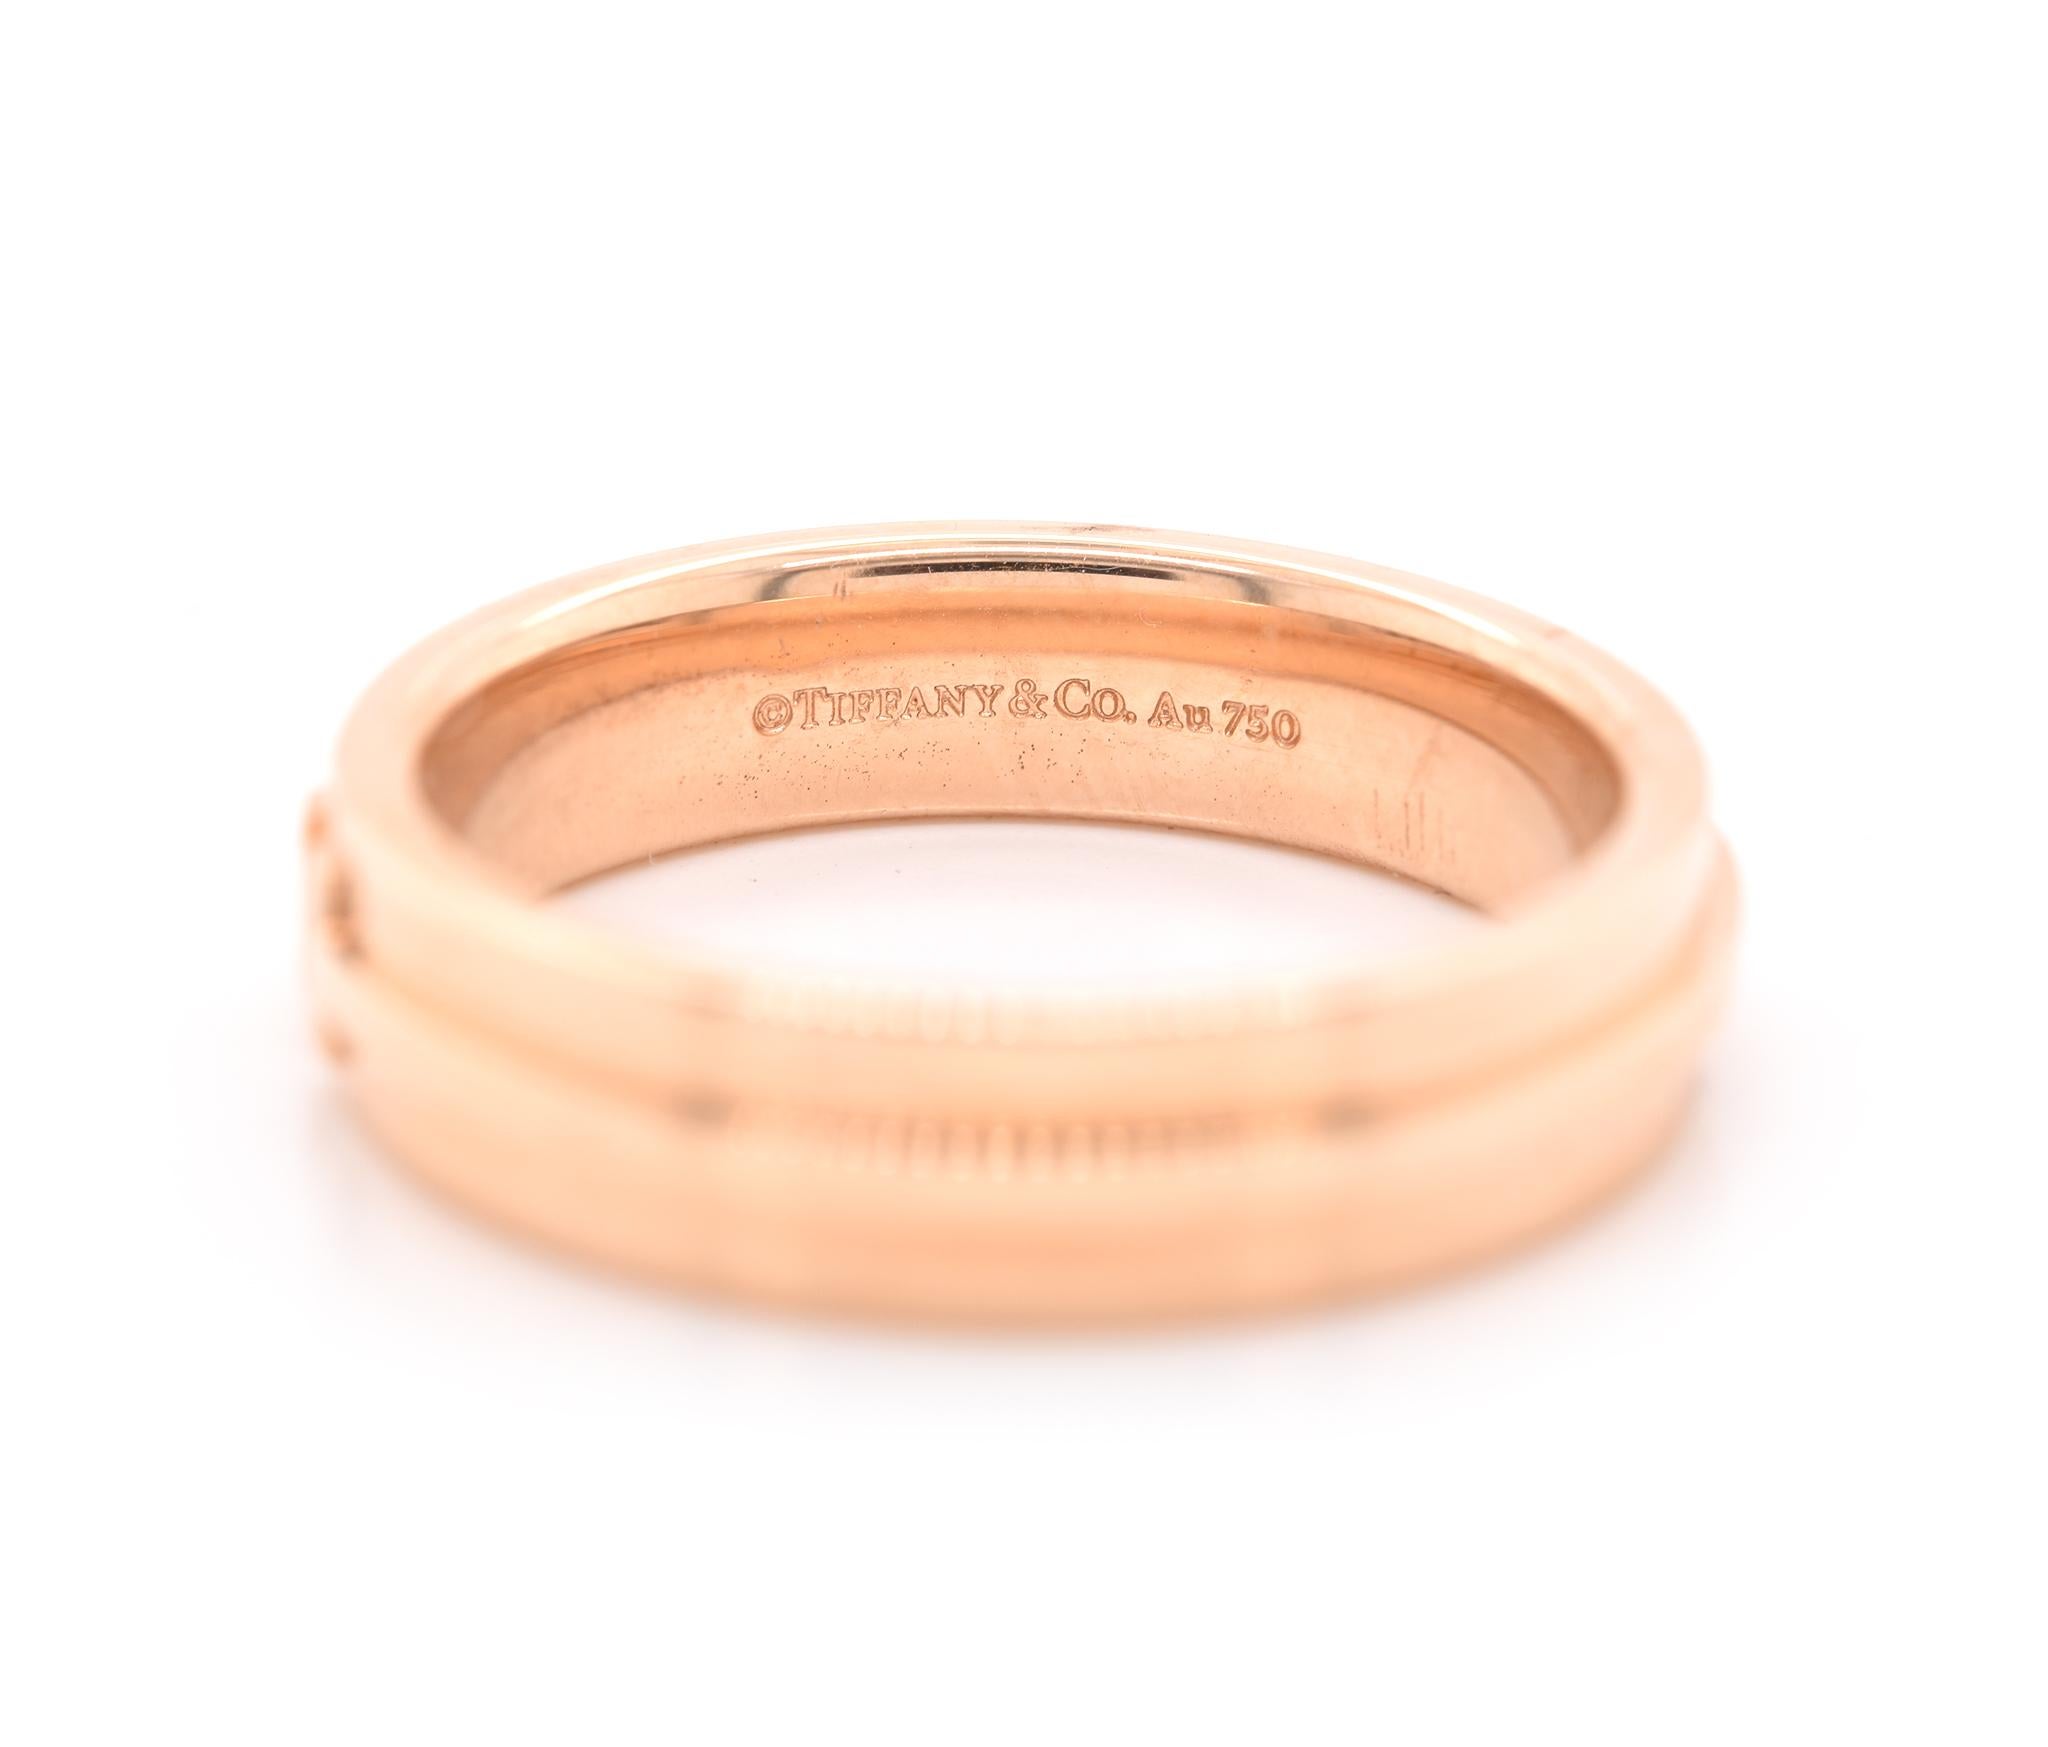 Designer: Tiffany & Co. 
Material: 18K rose gold
Dimensions: ring measures 5.5mm wide
Weight: 11.04 grams
Size: 10.5